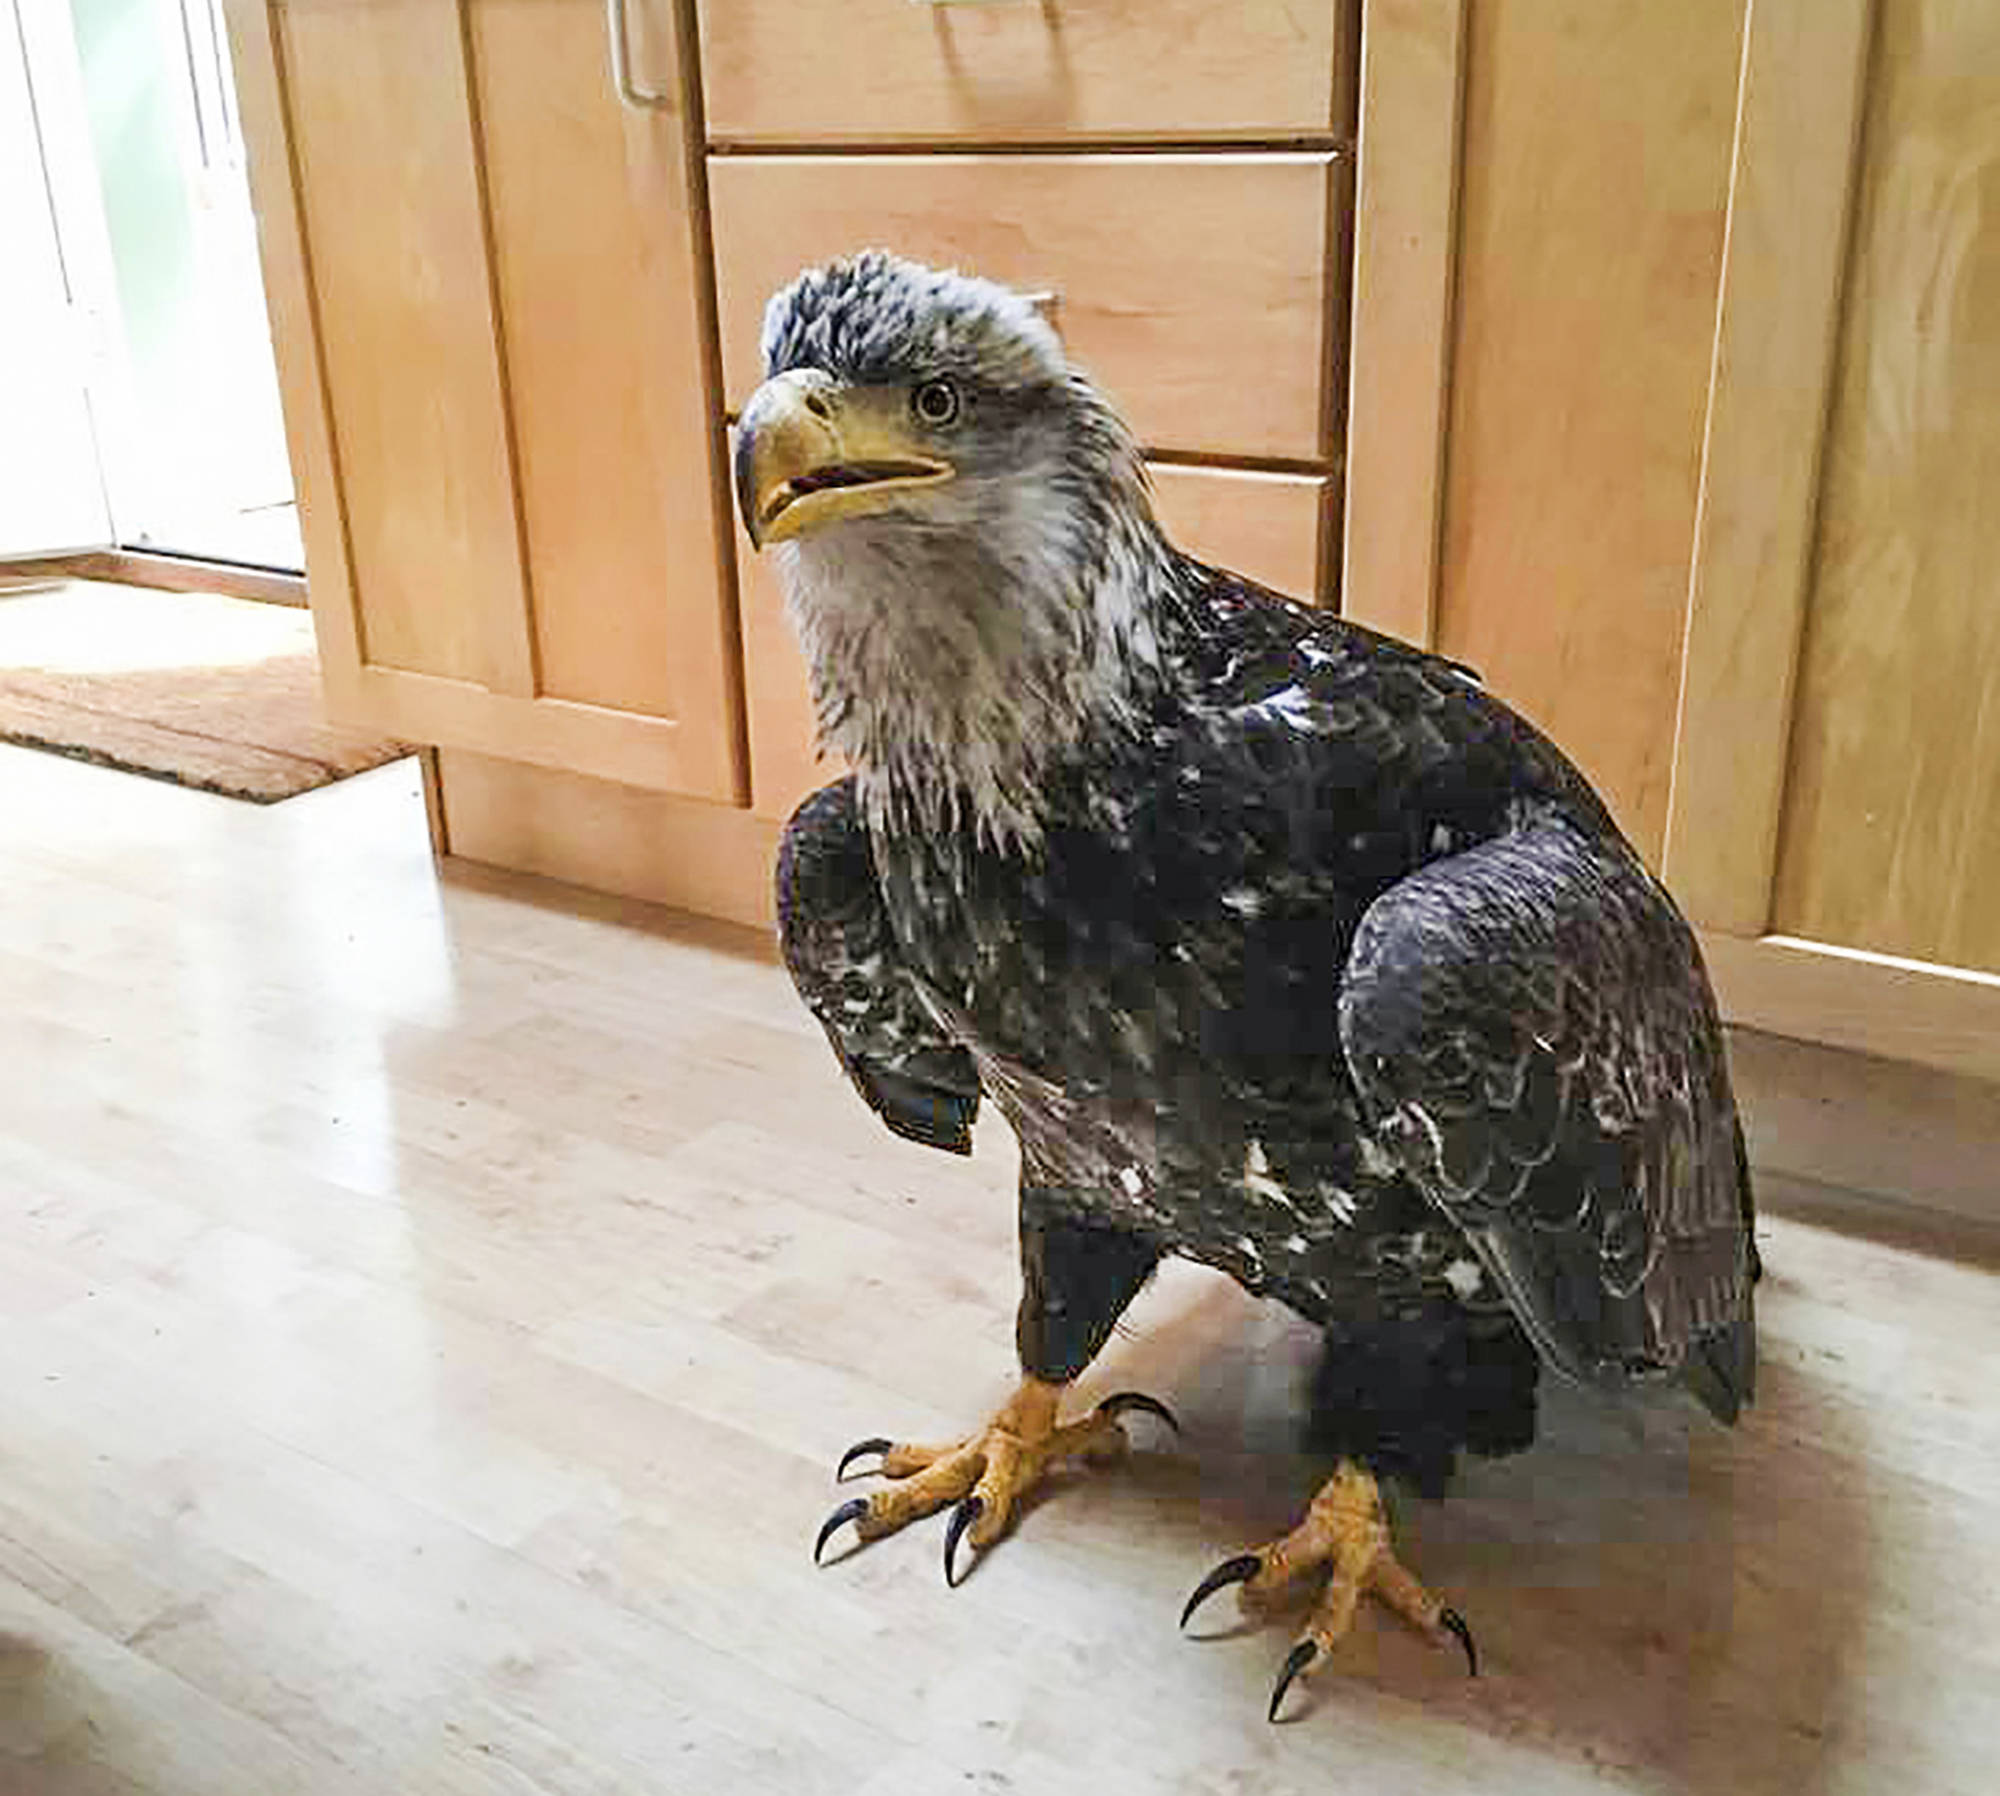 This May 4, 2019 photo shows the eagle that flew through the plate glass window into the living room of Stacy Studebaker in Kodiak, Alaska. (Stacy Studebaker)